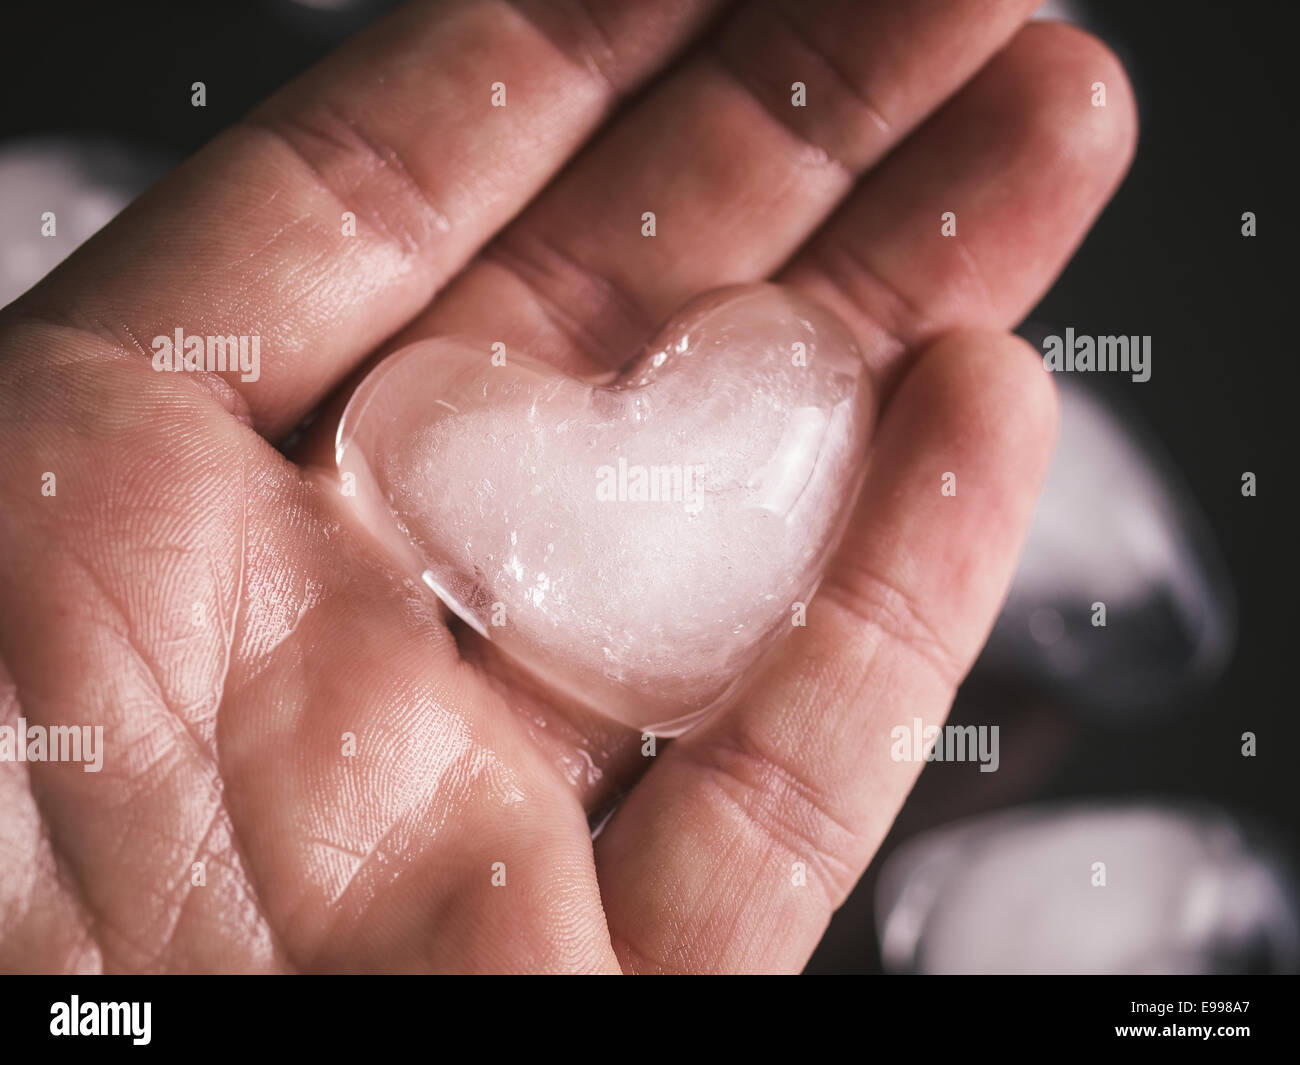 Ice heart in a hand in a extreme close up photo. Stock Photo